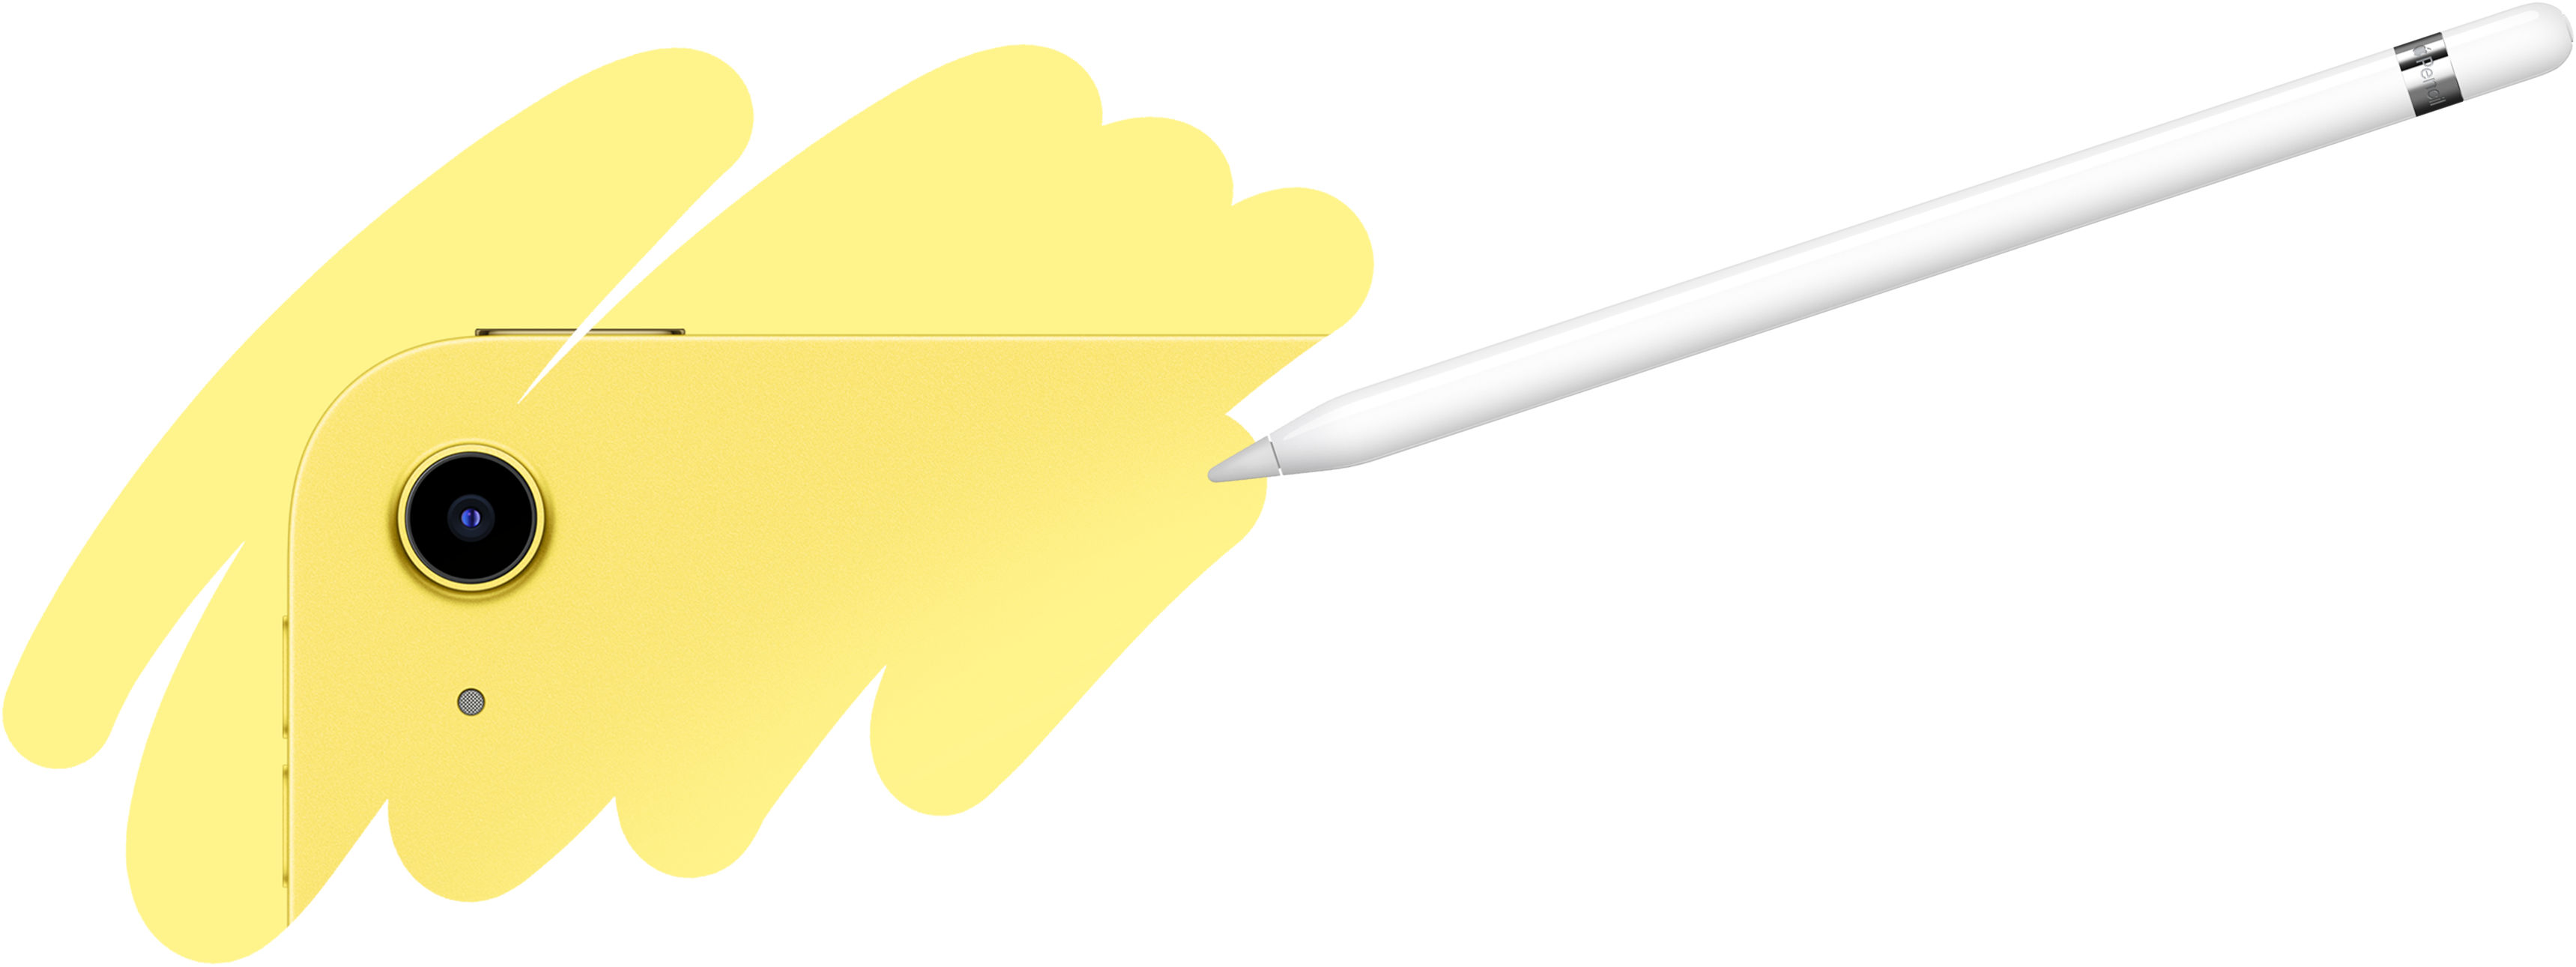 Apple Pencil stroke reveals the back of the iPad, showcasing the back camera.